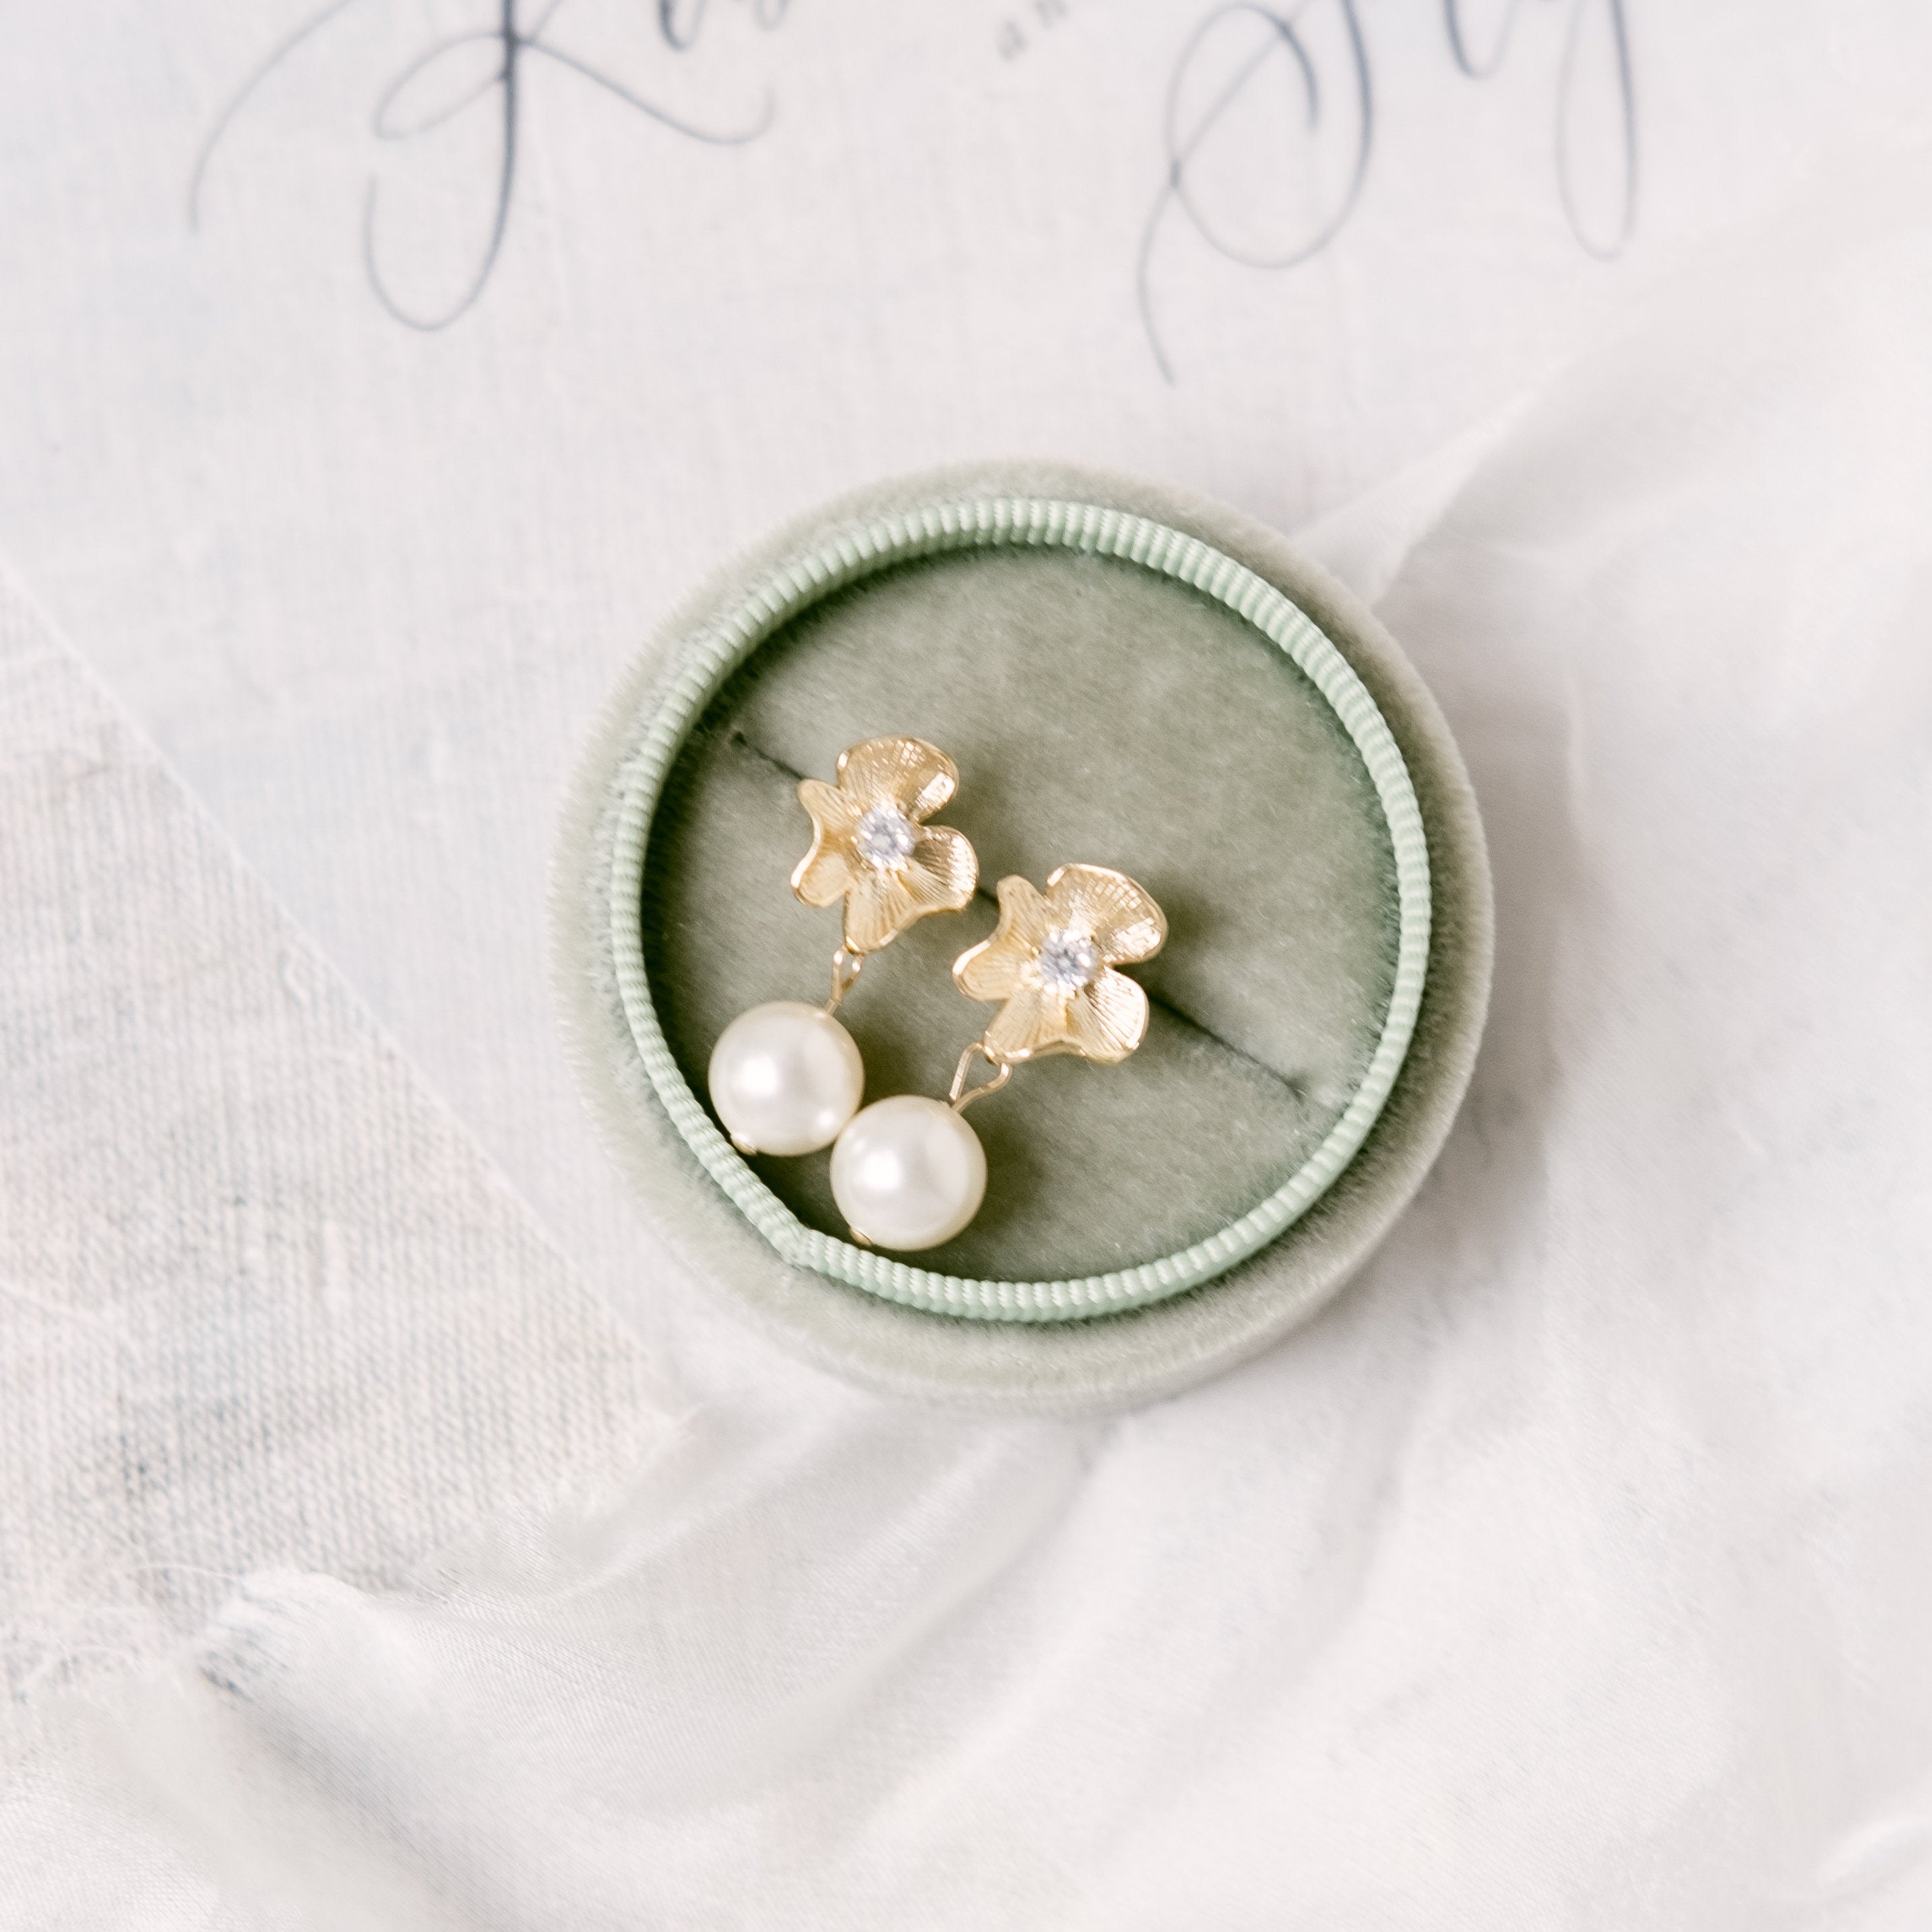 HANA // Silver floral and pearl earrings